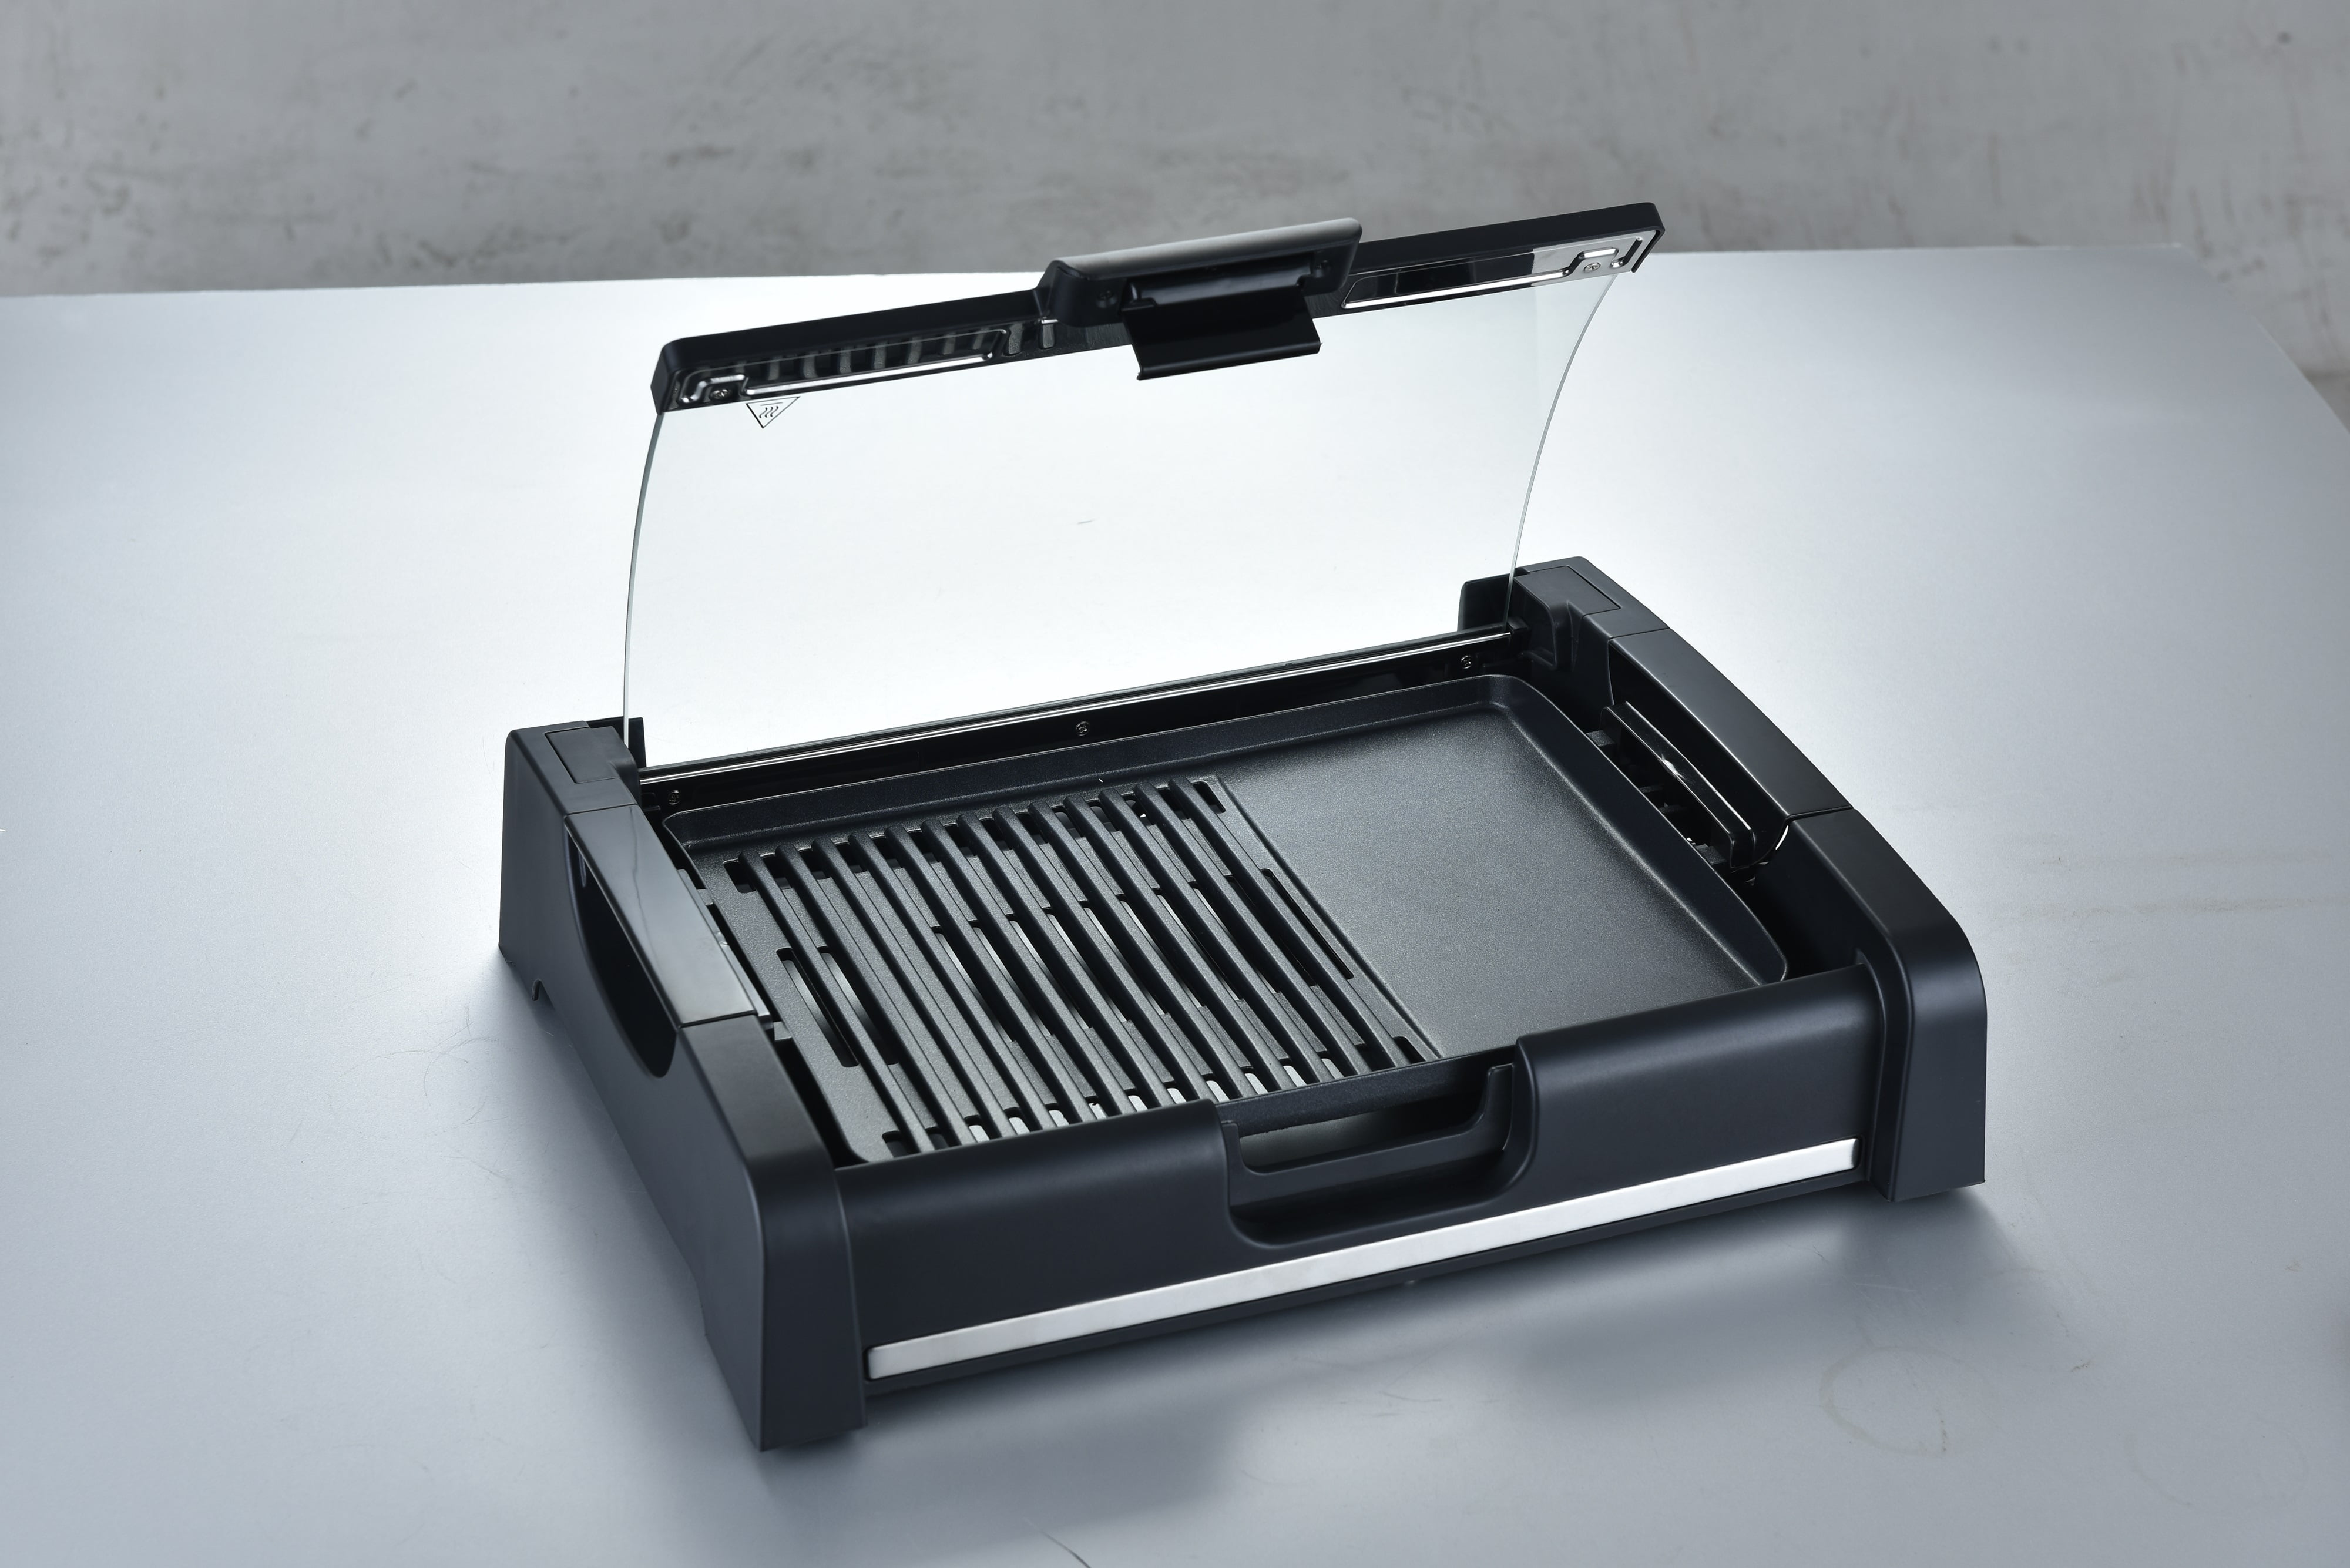 Danby DBSG29412XD11 Smokeless Indoor Grill in Black Advanced Air  Circulation Technology Independent on/off and temperatures.